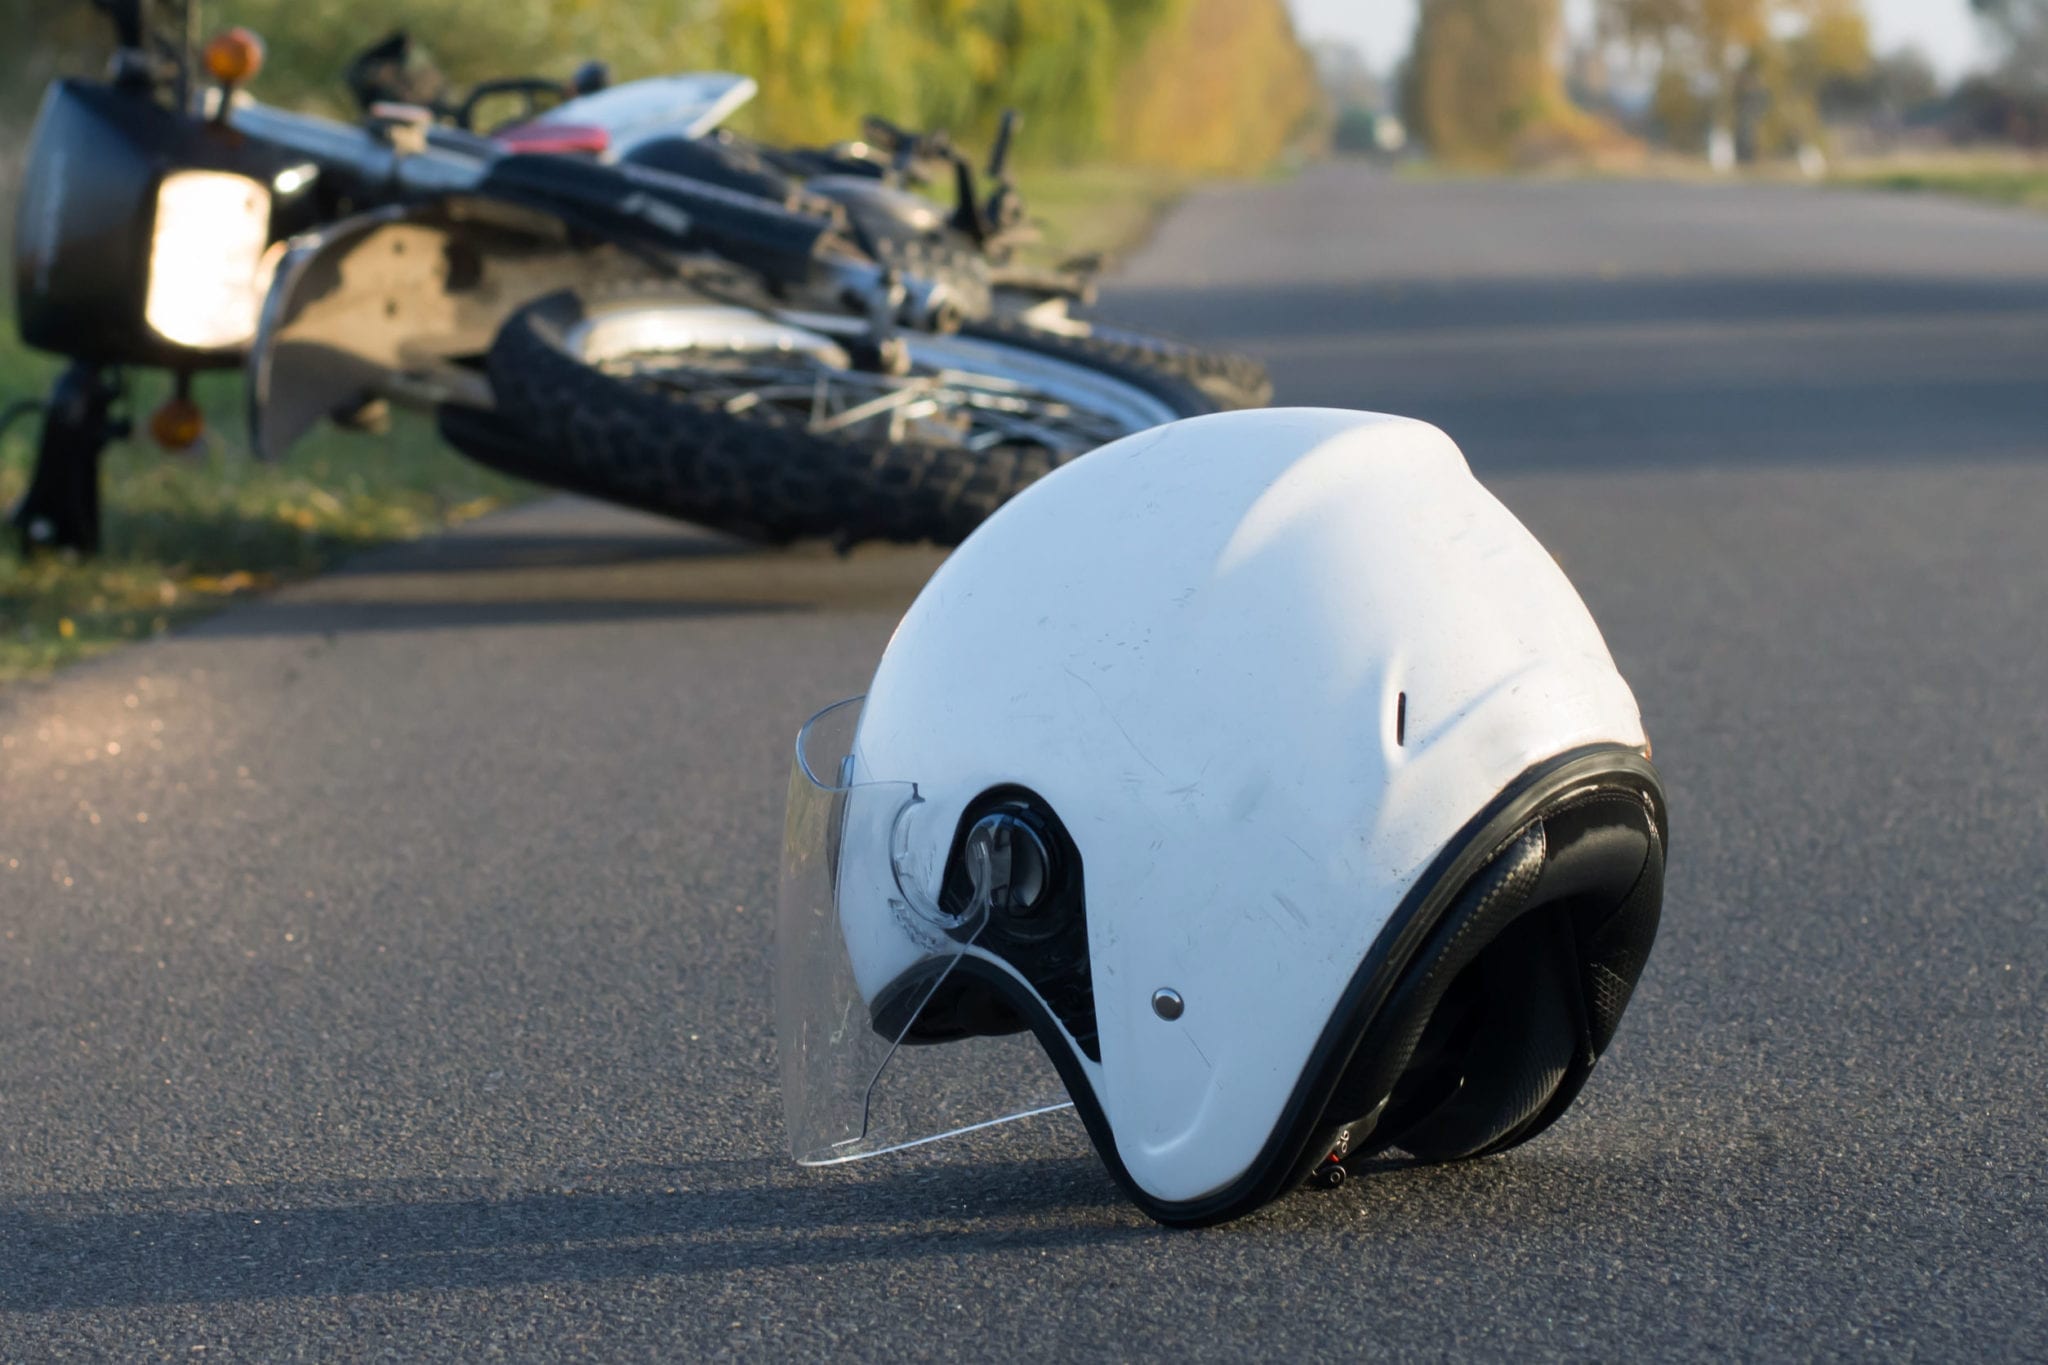 Davie Motorcycle Accident Lawyer